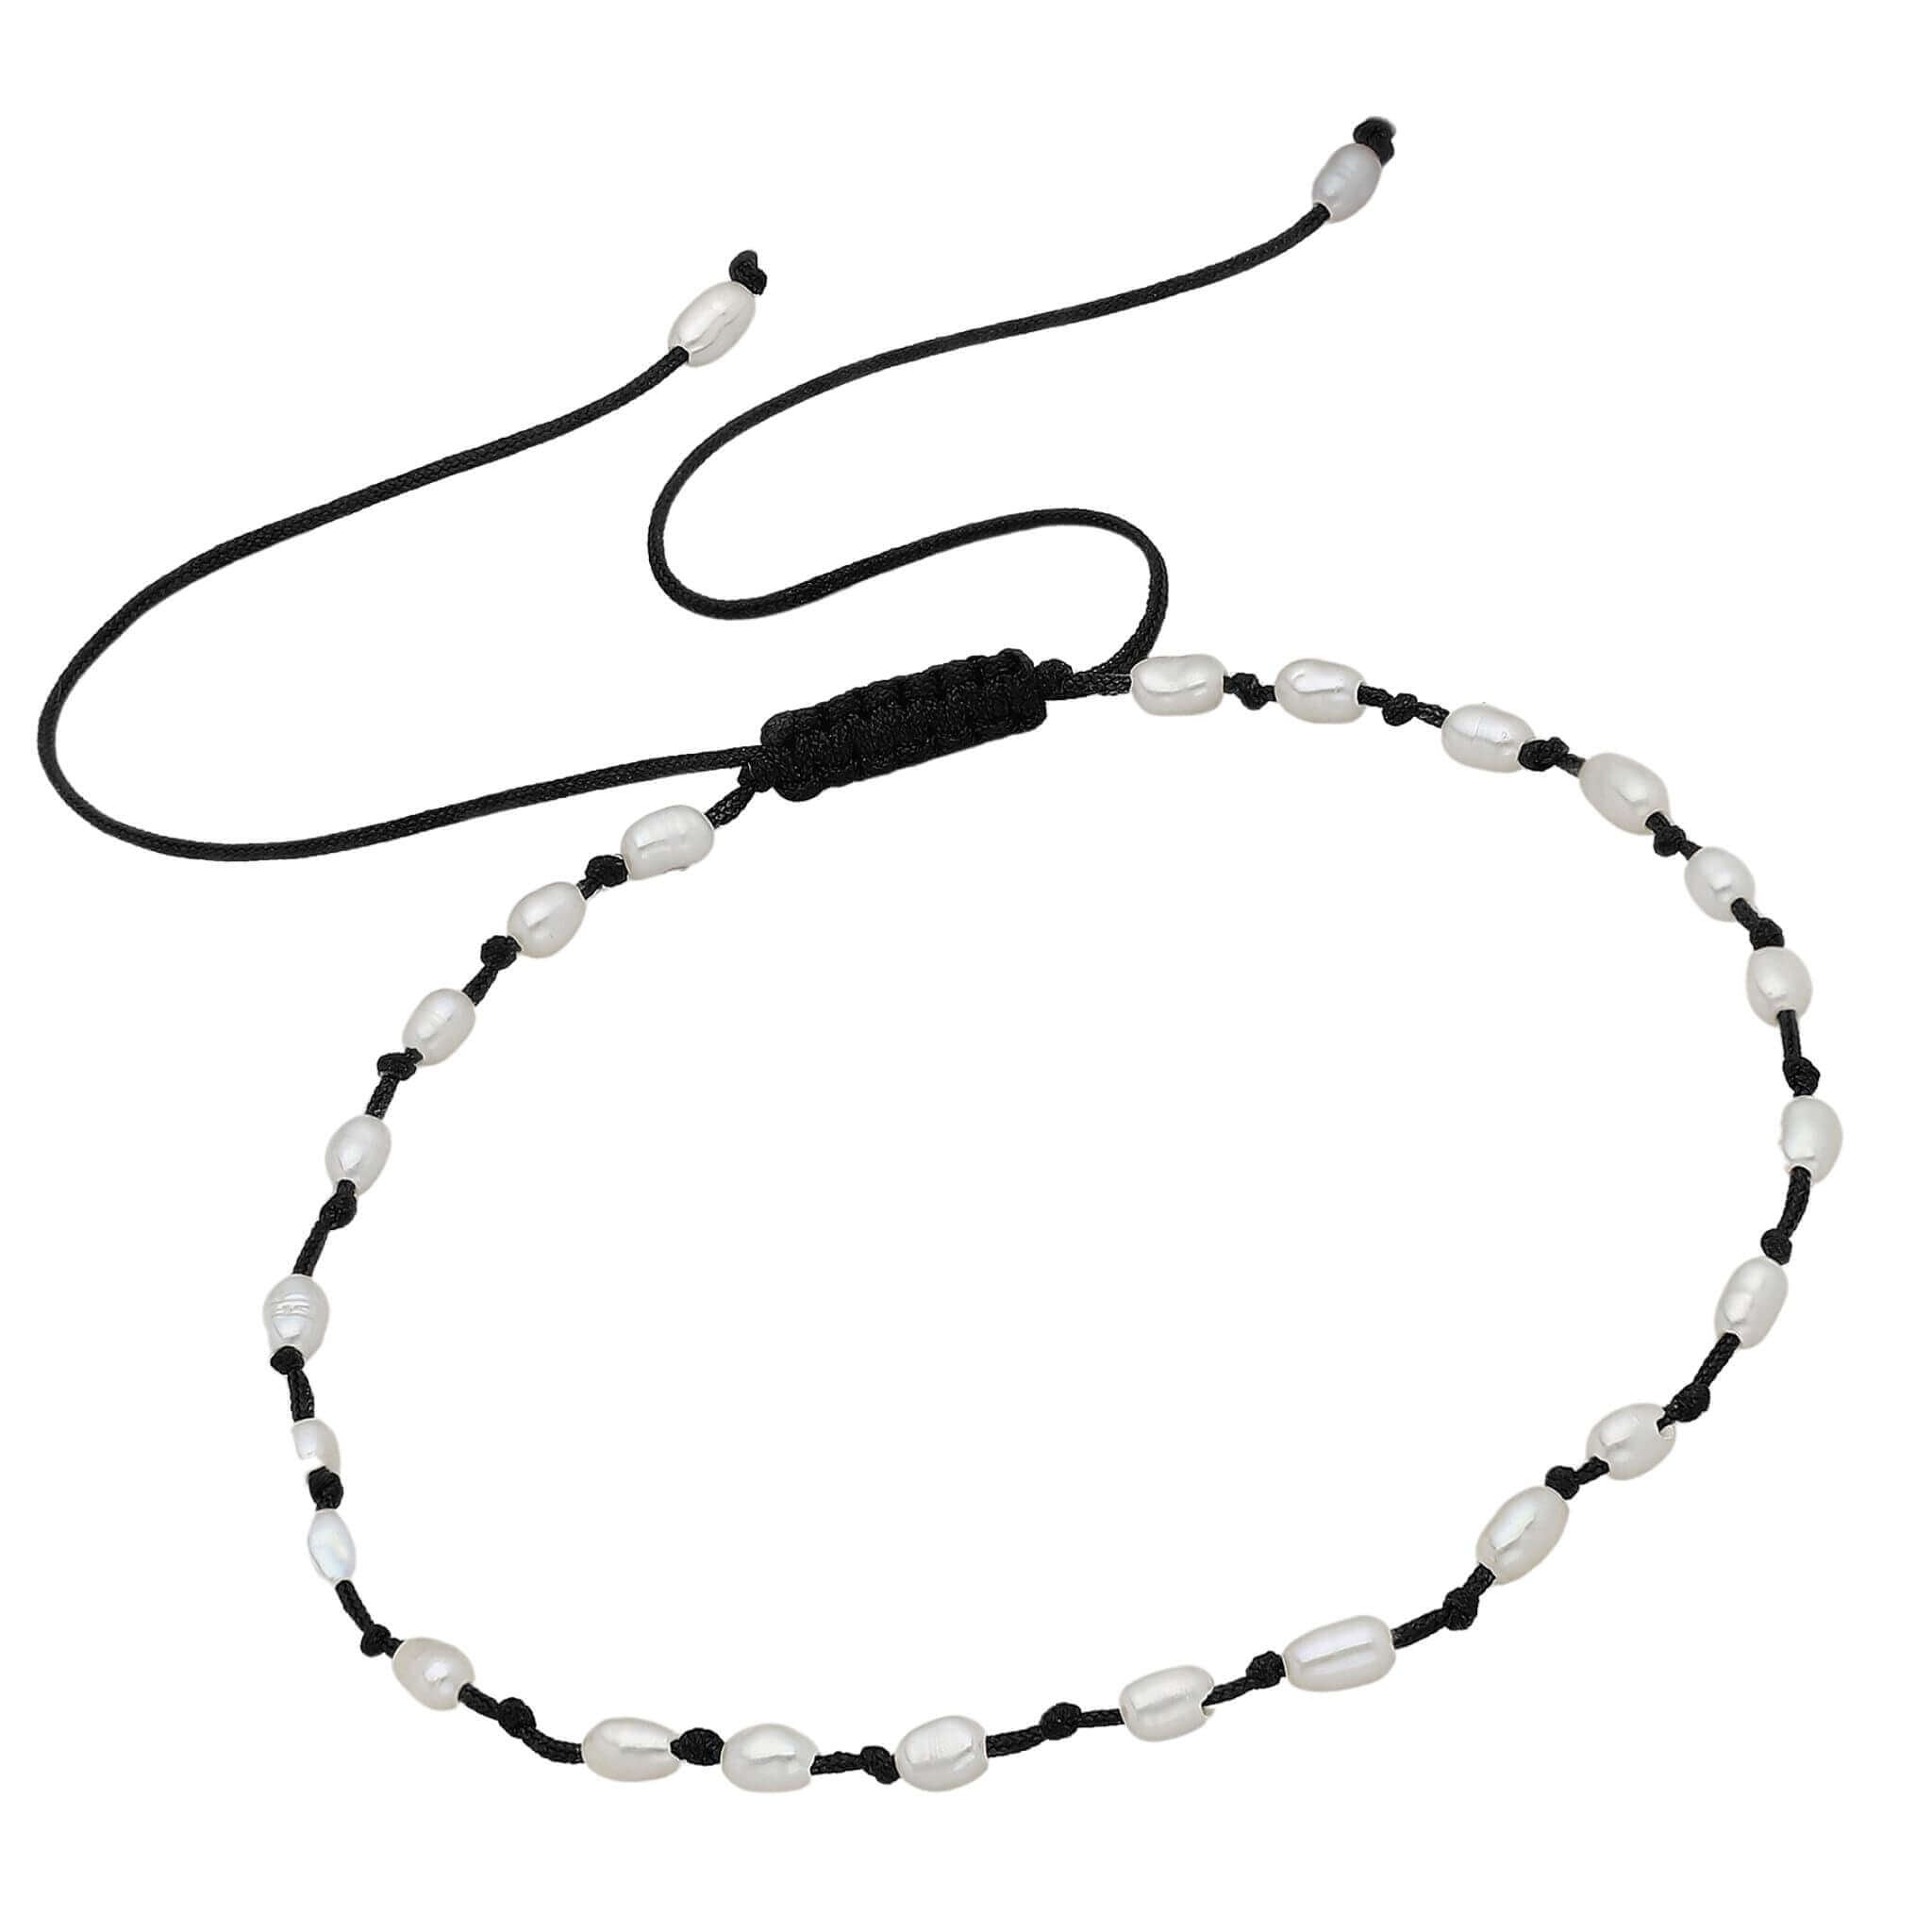 2 in 1 adjustable black thread ghungroo anklets – Alluring Accessories